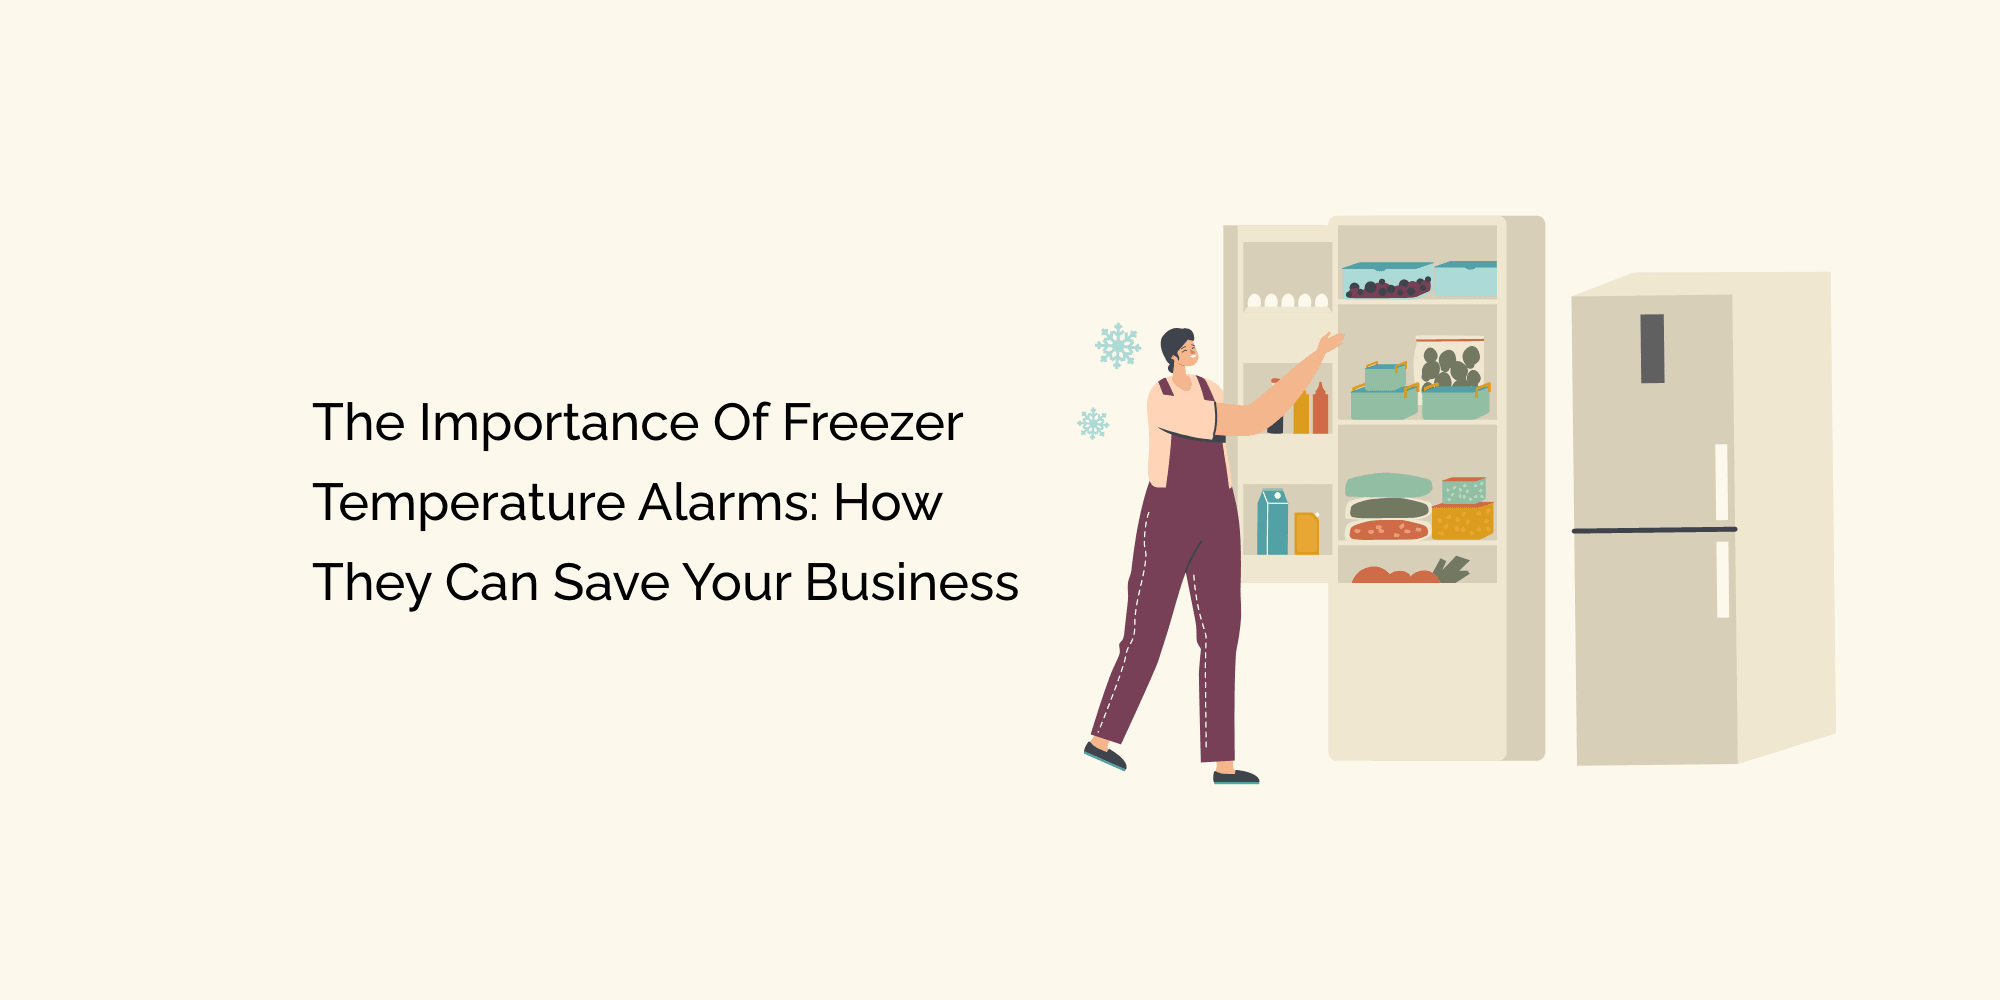 The Importance of Freezer Temperature Alarms: How They Can Save Your Business